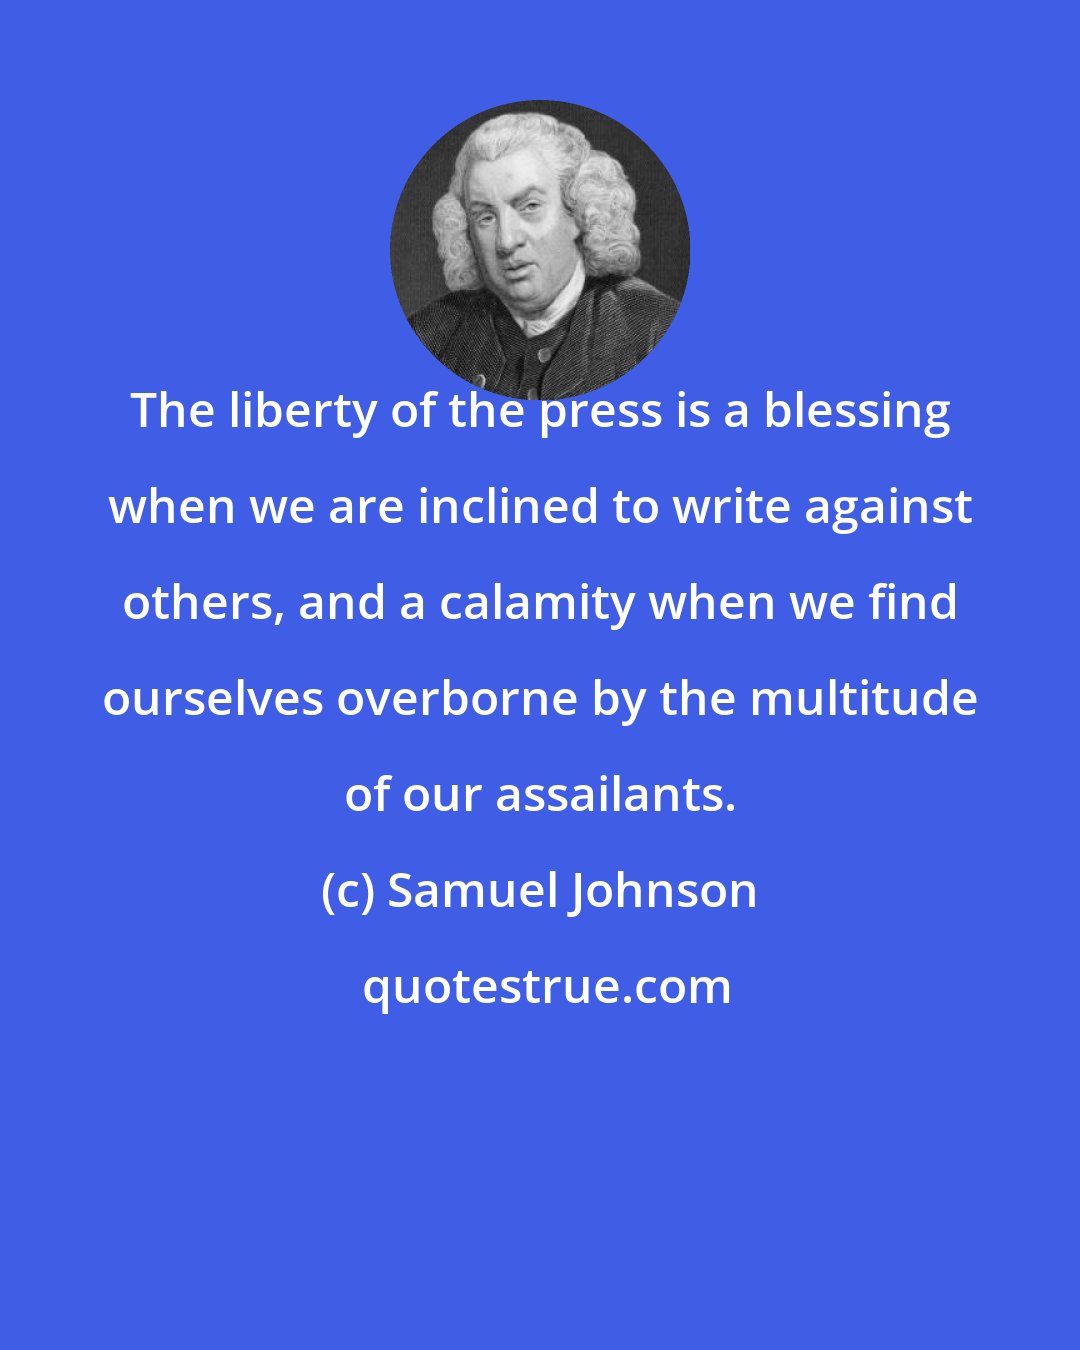 Samuel Johnson: The liberty of the press is a blessing when we are inclined to write against others, and a calamity when we find ourselves overborne by the multitude of our assailants.